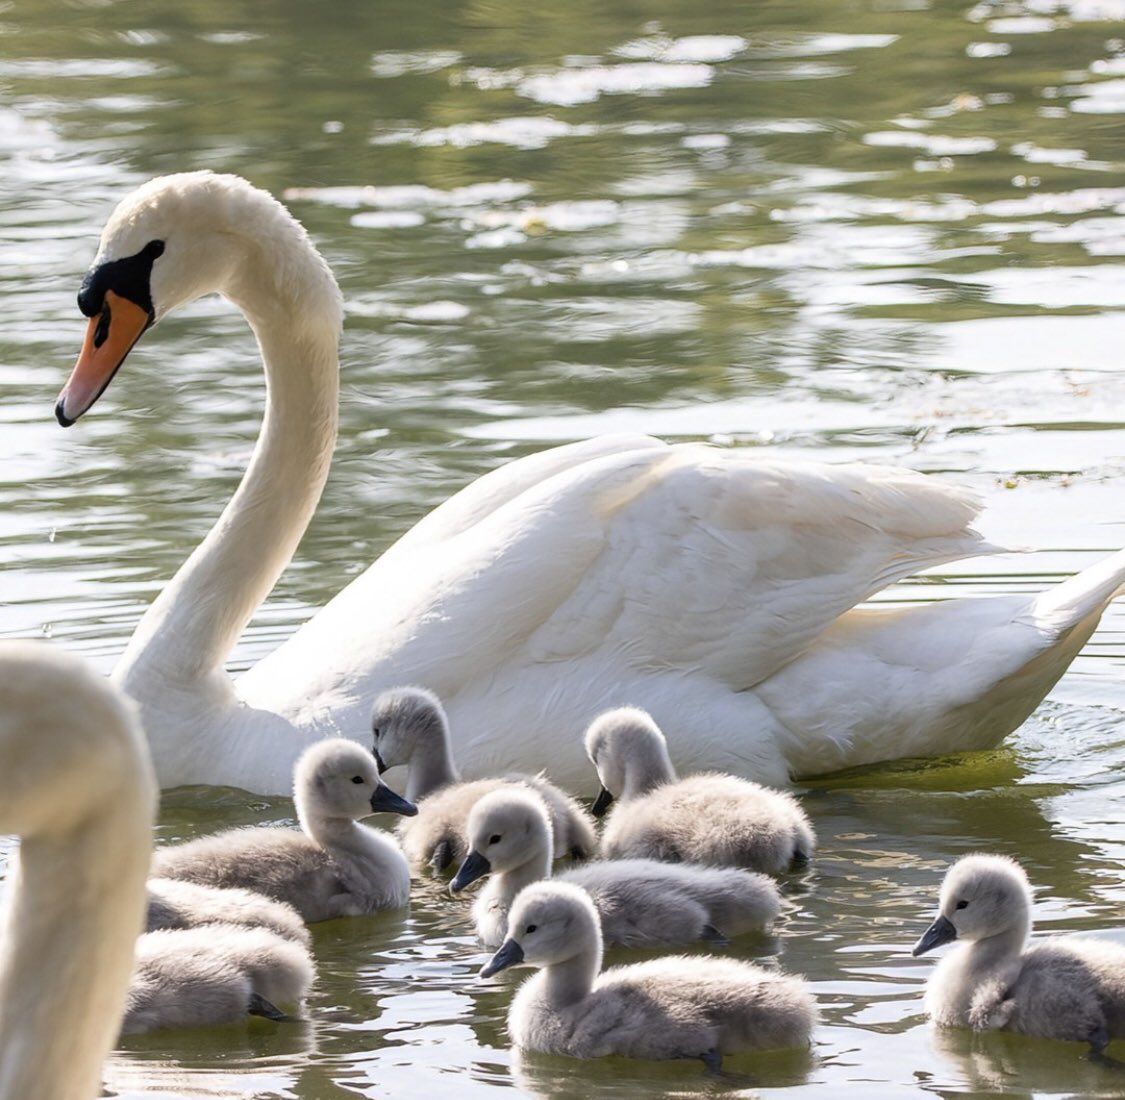 This was 5/11.  8 cygnets and 2 parents.  People clamoring for pics.  Today they are left with 1 parent and 2 cygnets.  So many people who are supposed to be pro-wildlife are completely disappointing #muteswans #birds #citywildlife #urbanwildlife